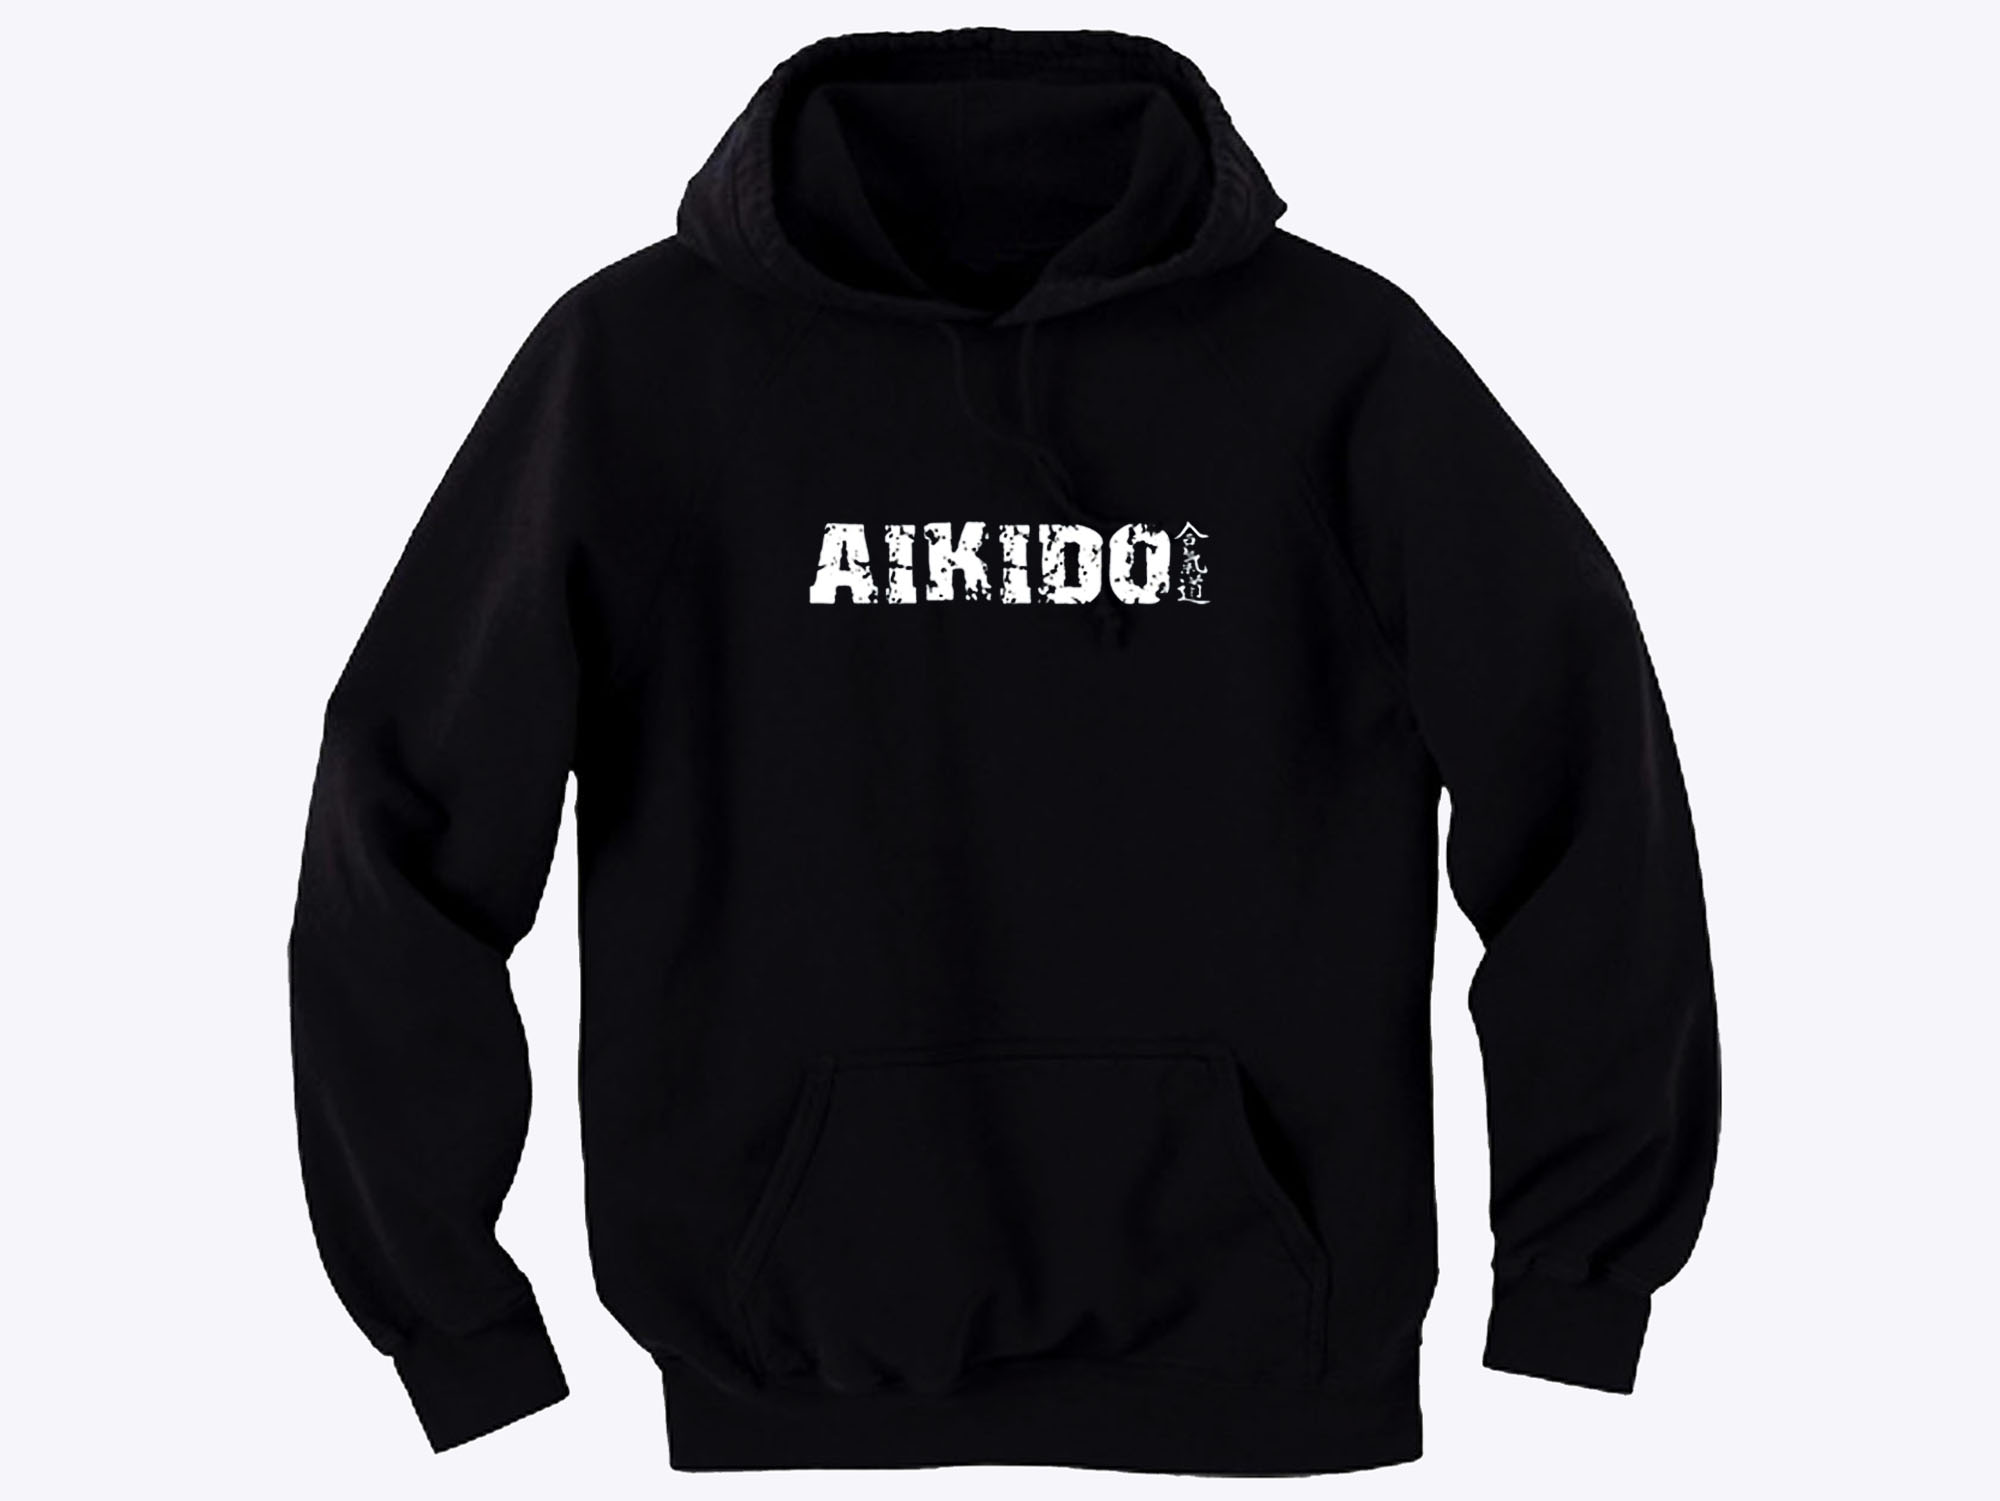 Aikido pullover hoodie-distressed print